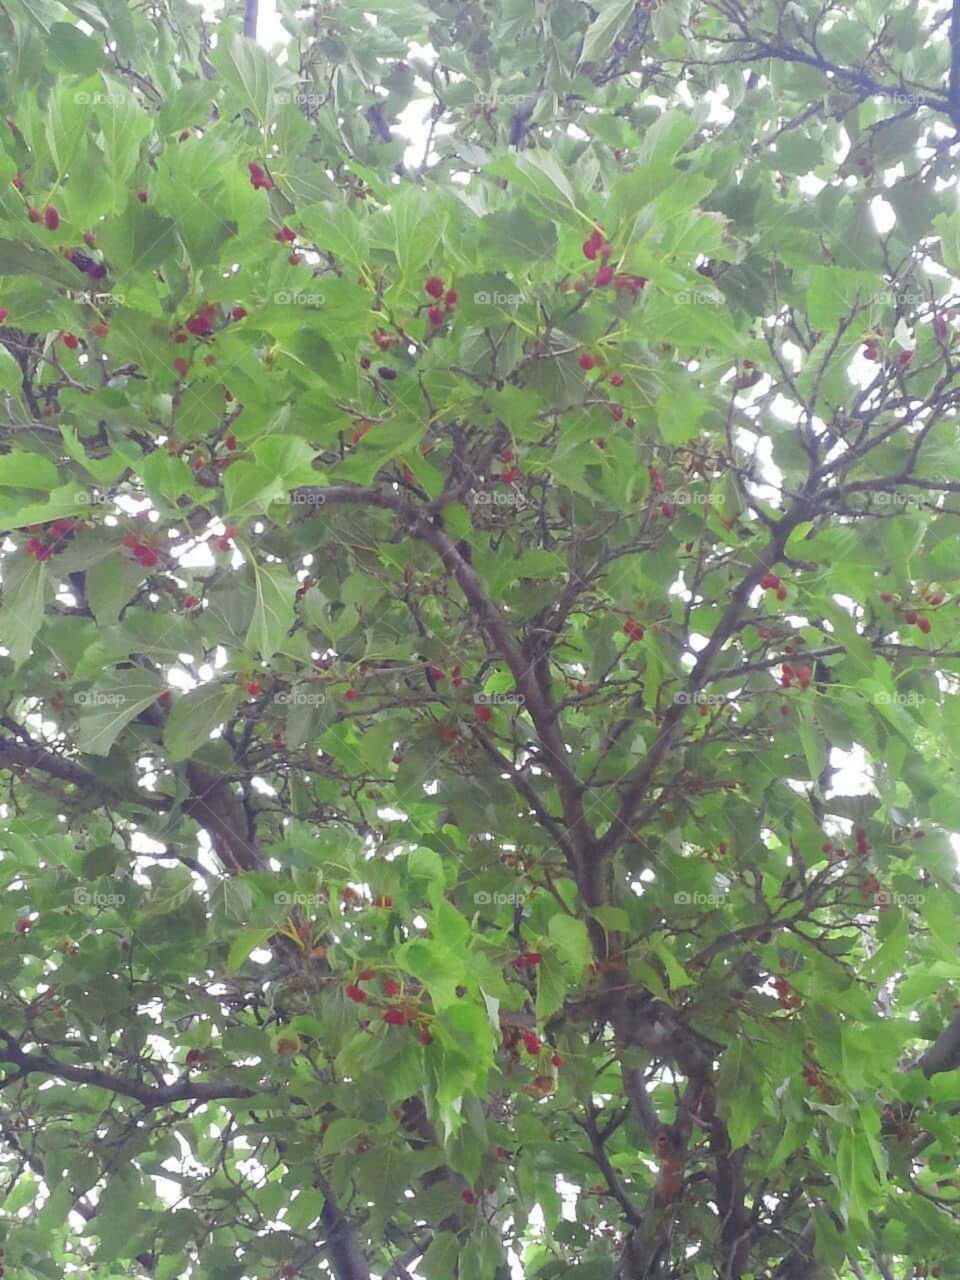 Mulberry Tree-
Pretty, great shade provider, and birds love the fruit, but what a mess when the berries fall to the ground...or onto your car.